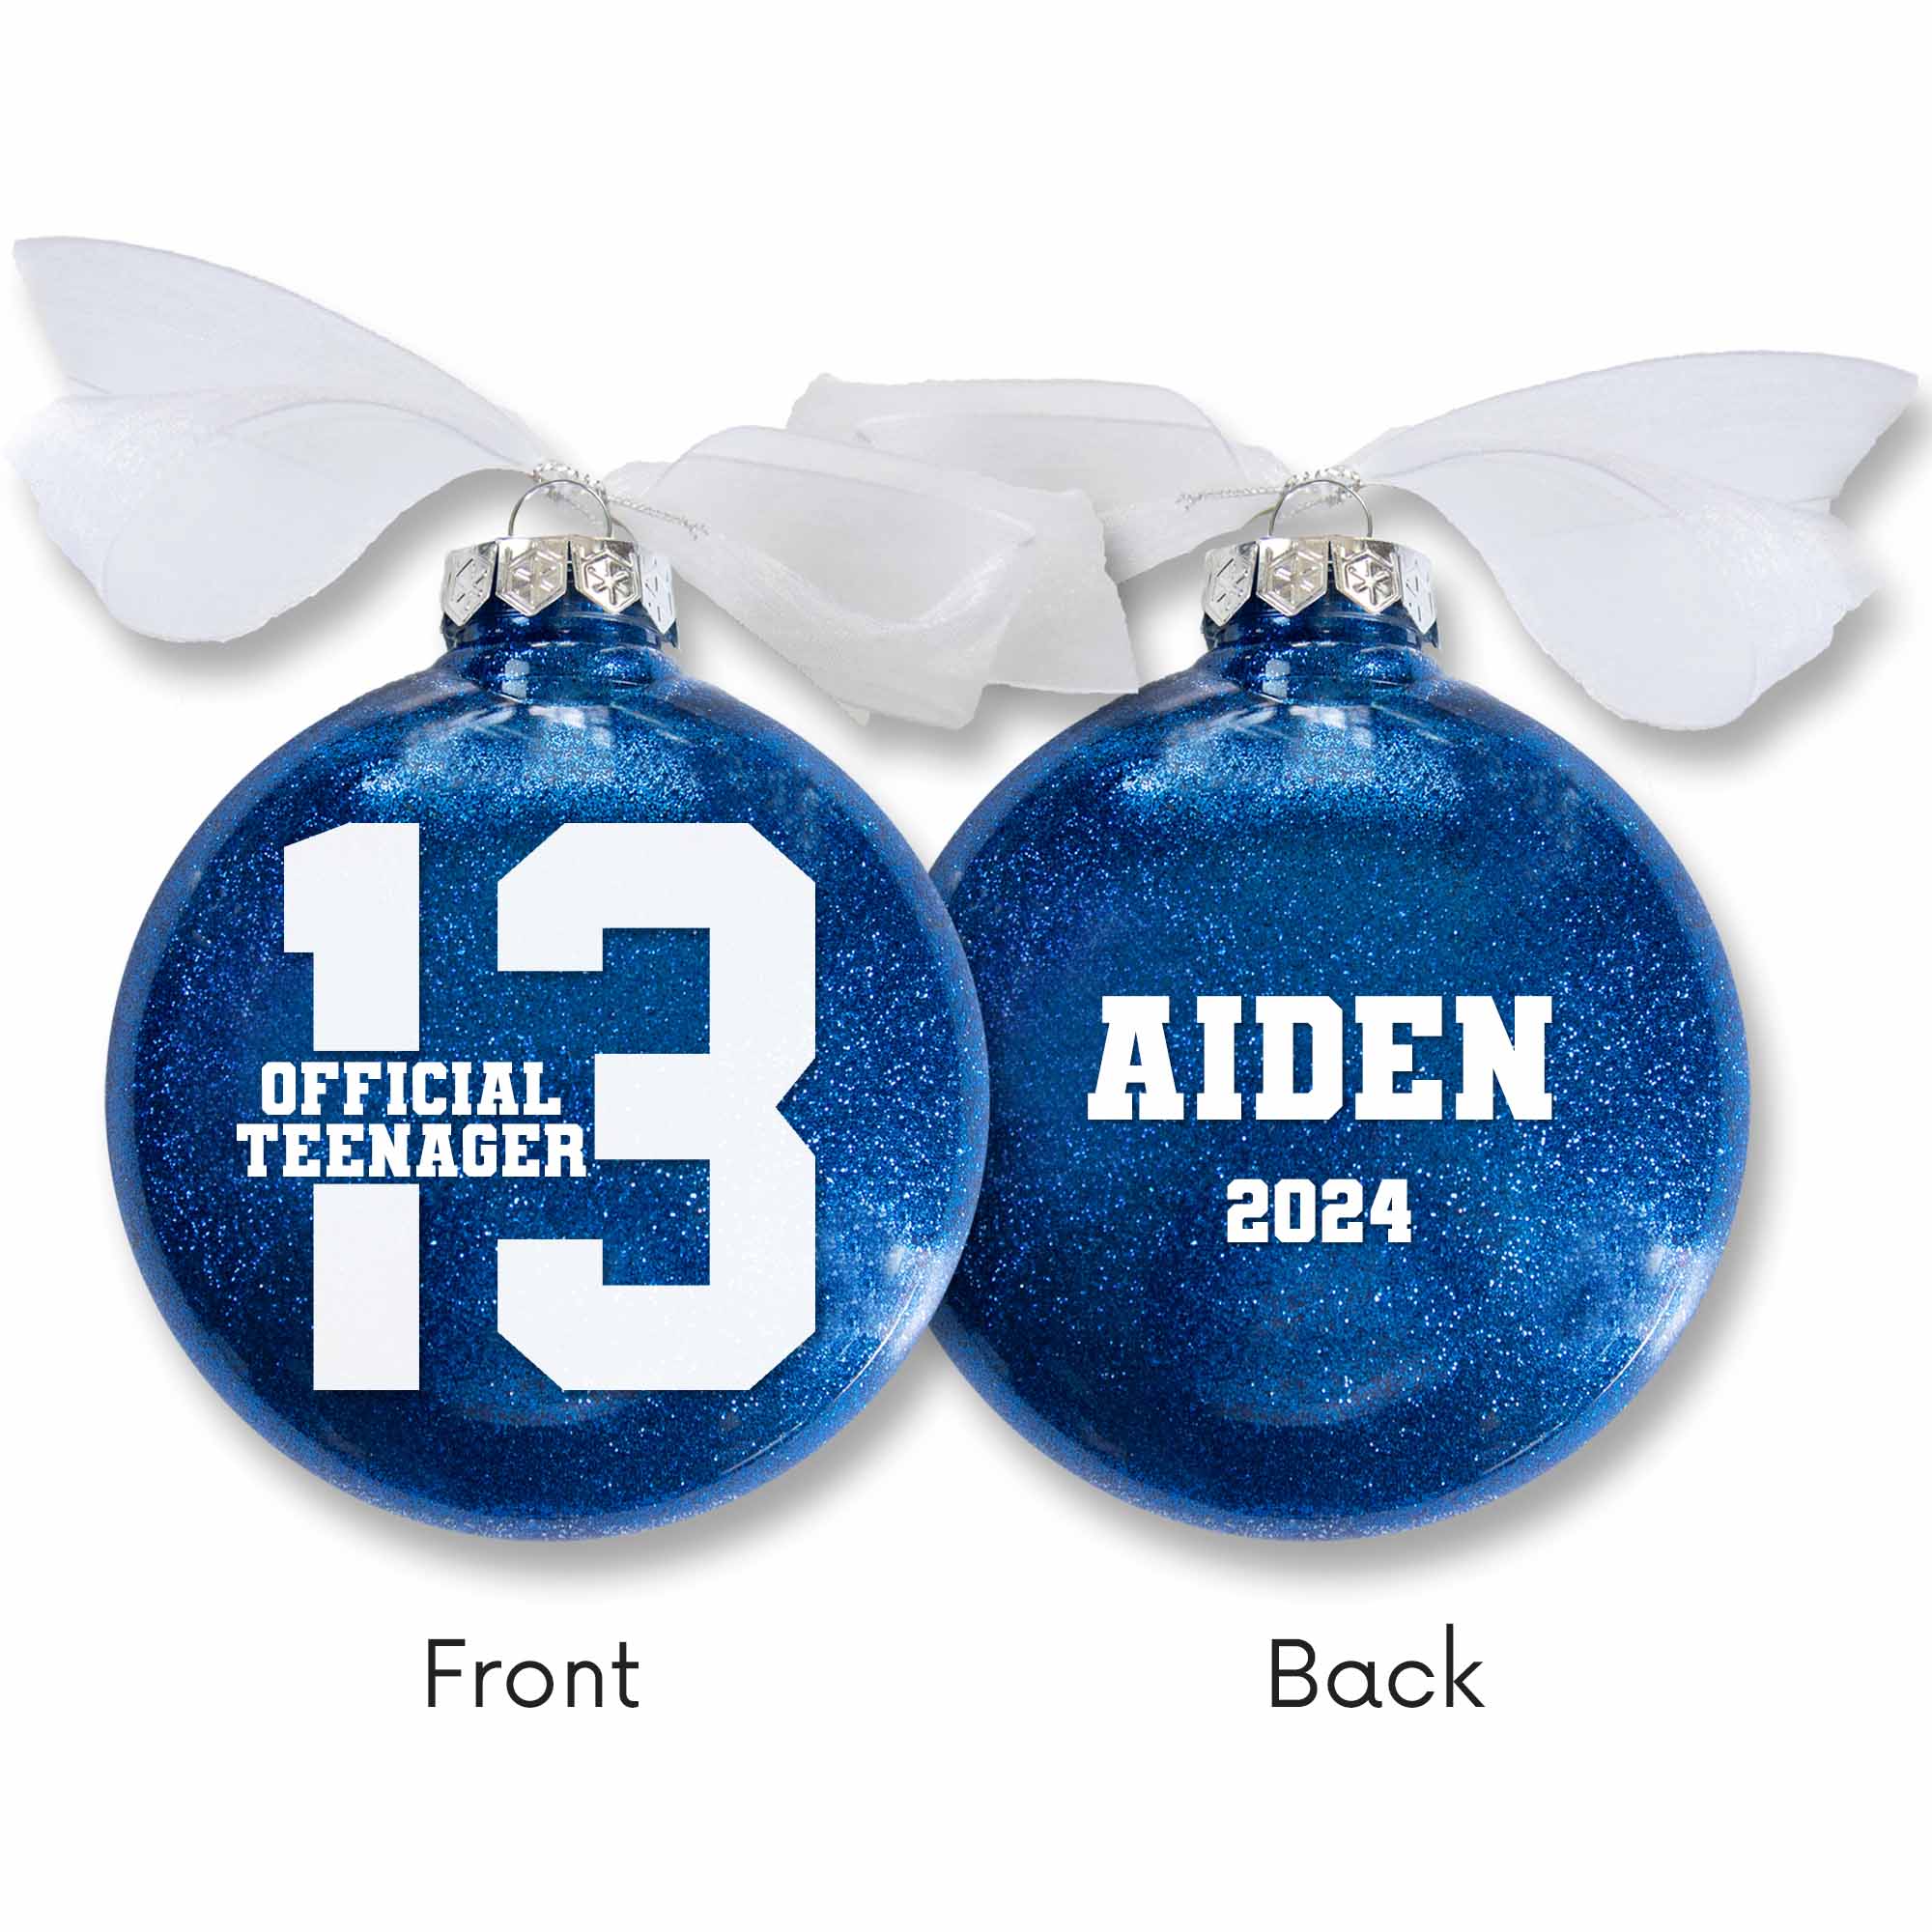 13 Official Teenager Birthday Ornament in royal blue glitter and personalized with name and year